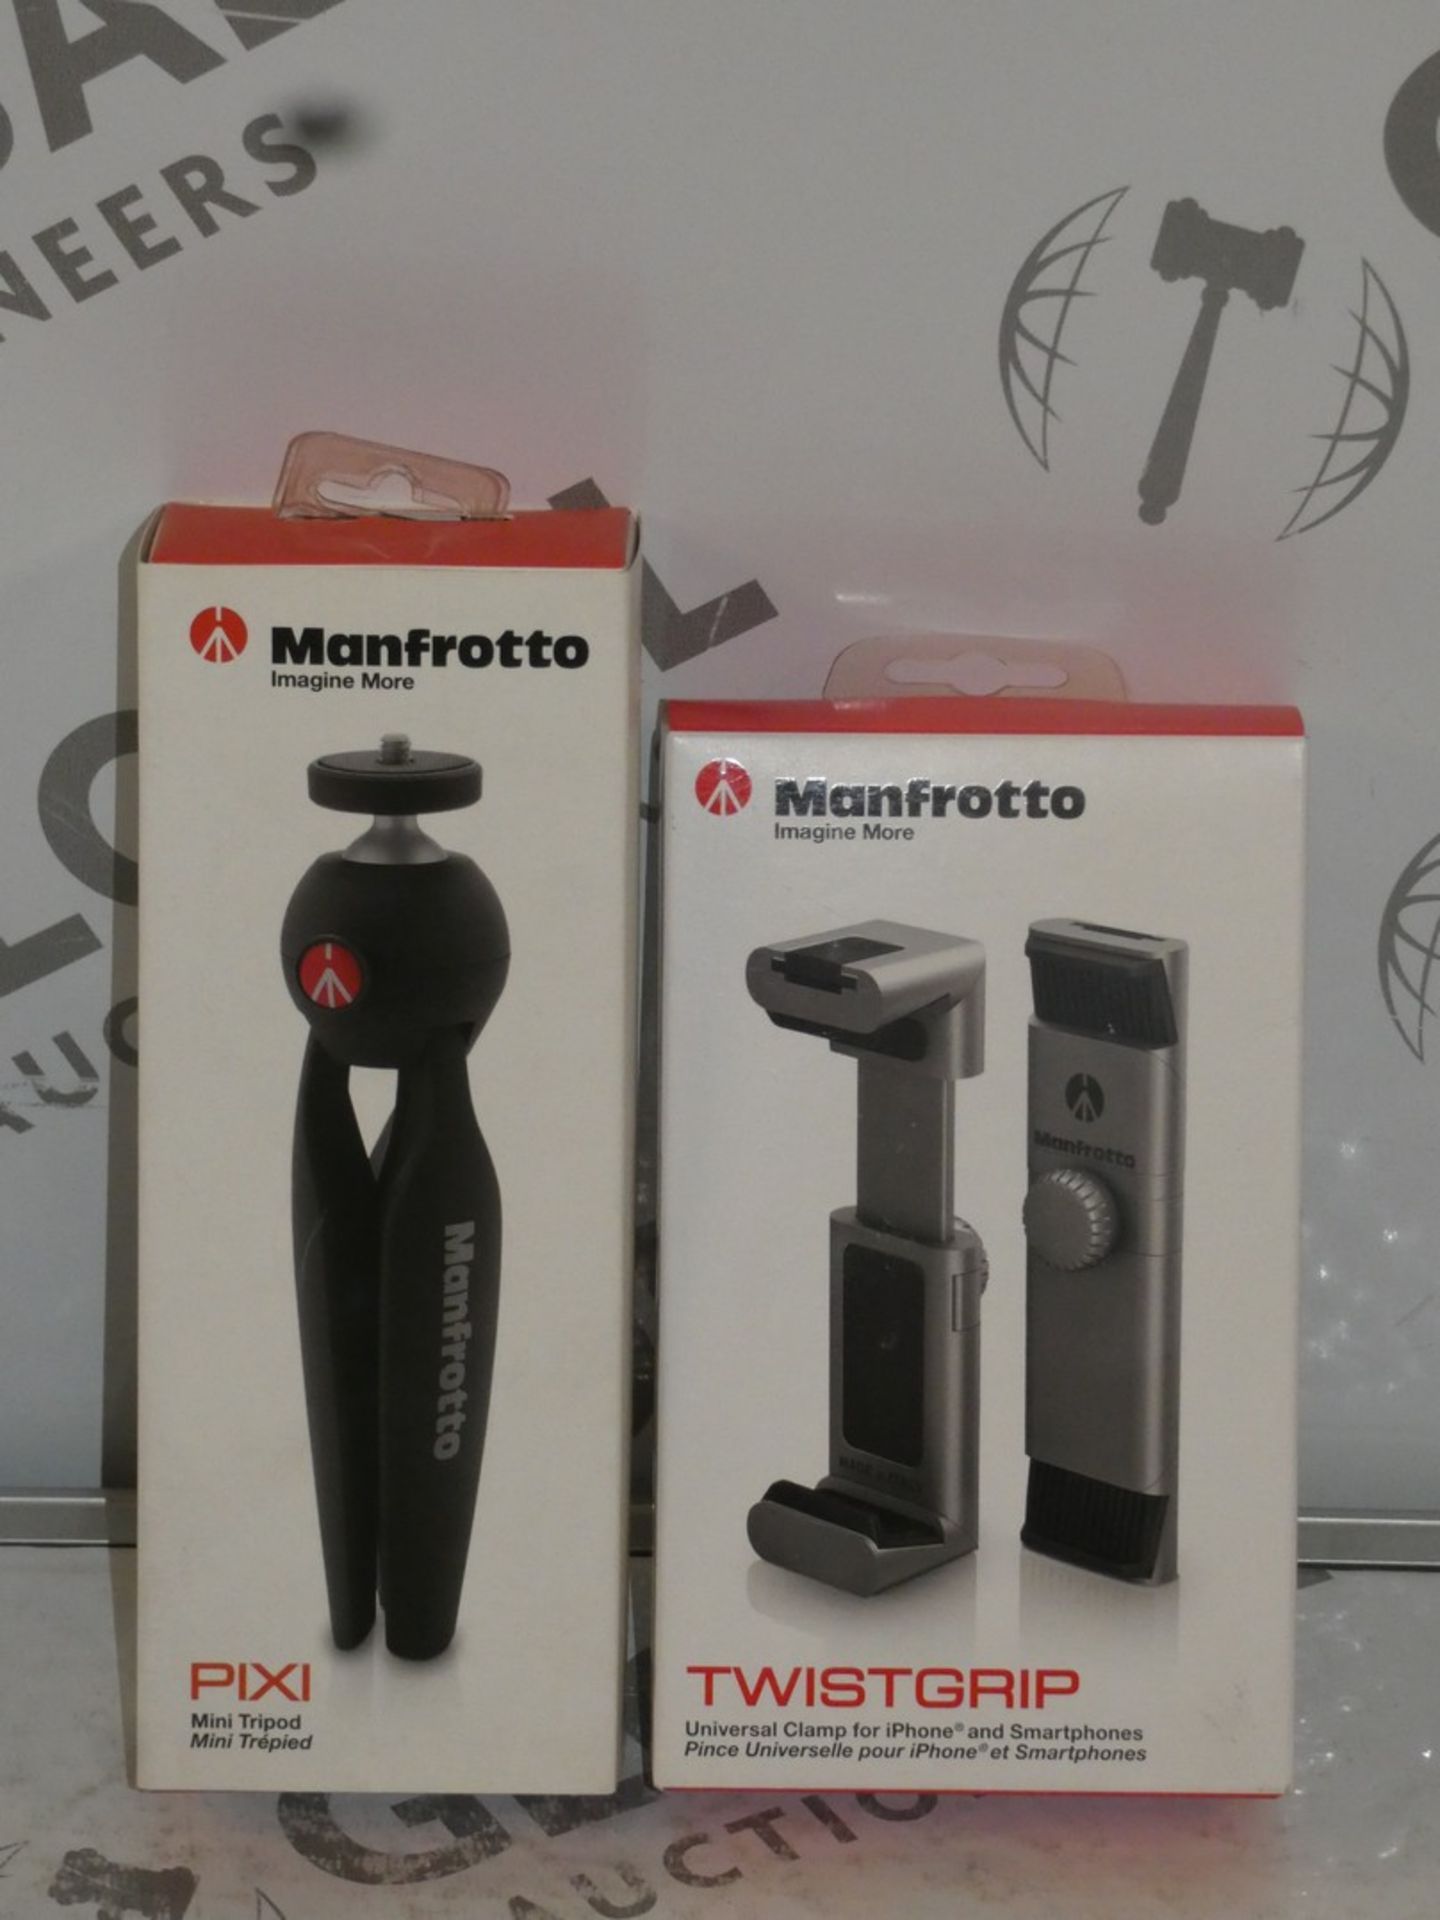 Lot to Contain 2 Manfrotto Smart Phone and Camera Accessories to Include the Manfrotto Pixie Mini